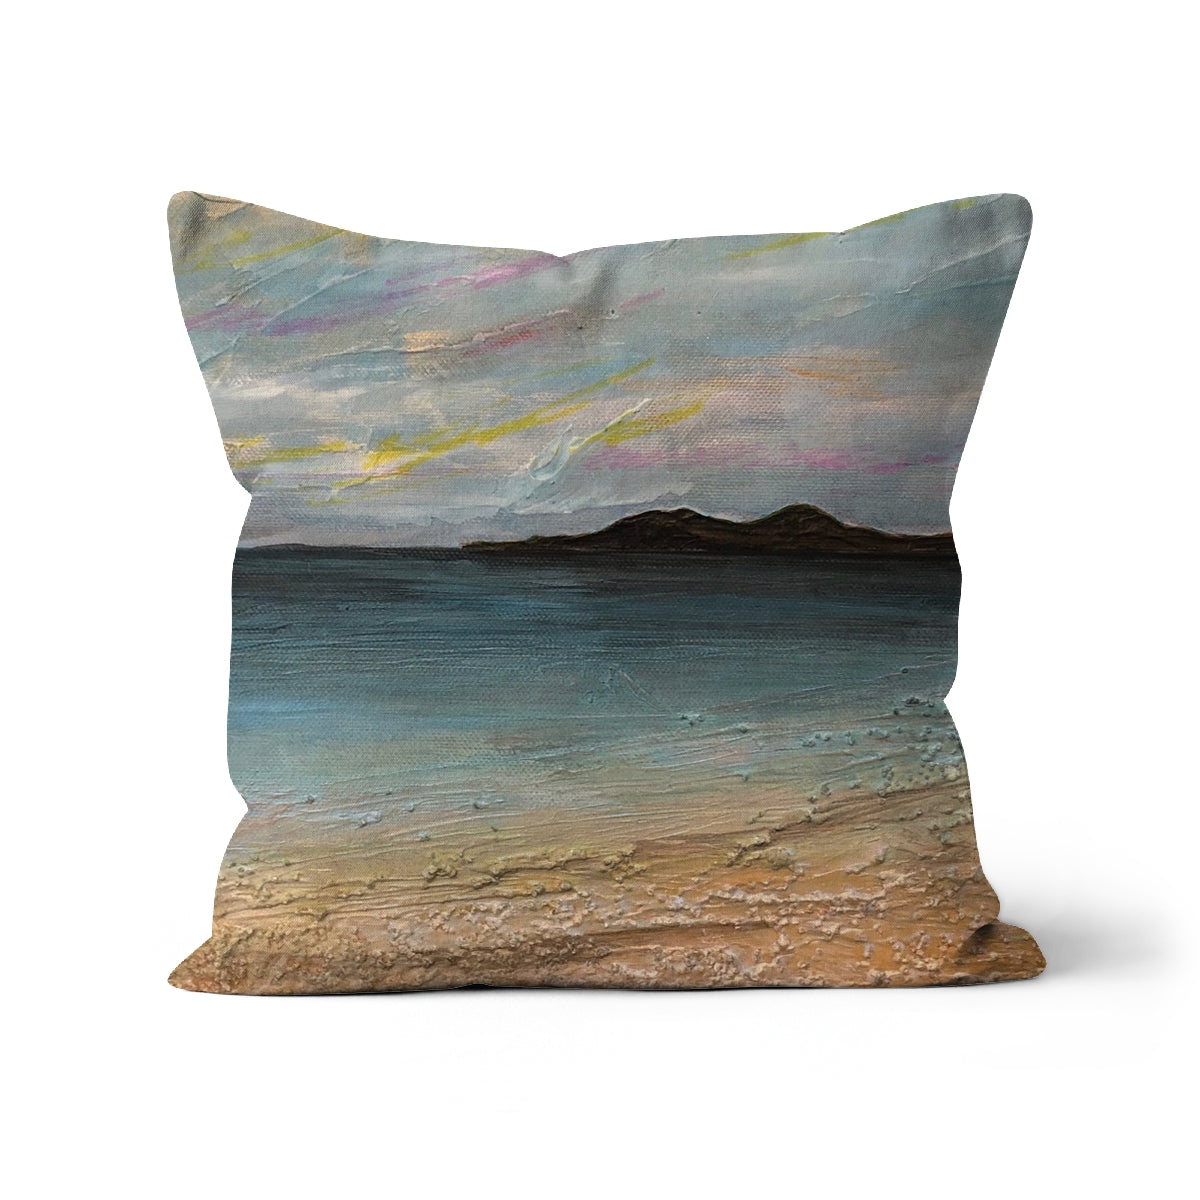 Garrynamonie Beach South Uist Art Gifts Cushion-Cushions-Hebridean Islands Art Gallery-Faux Suede-18"x18"-Paintings, Prints, Homeware, Art Gifts From Scotland By Scottish Artist Kevin Hunter